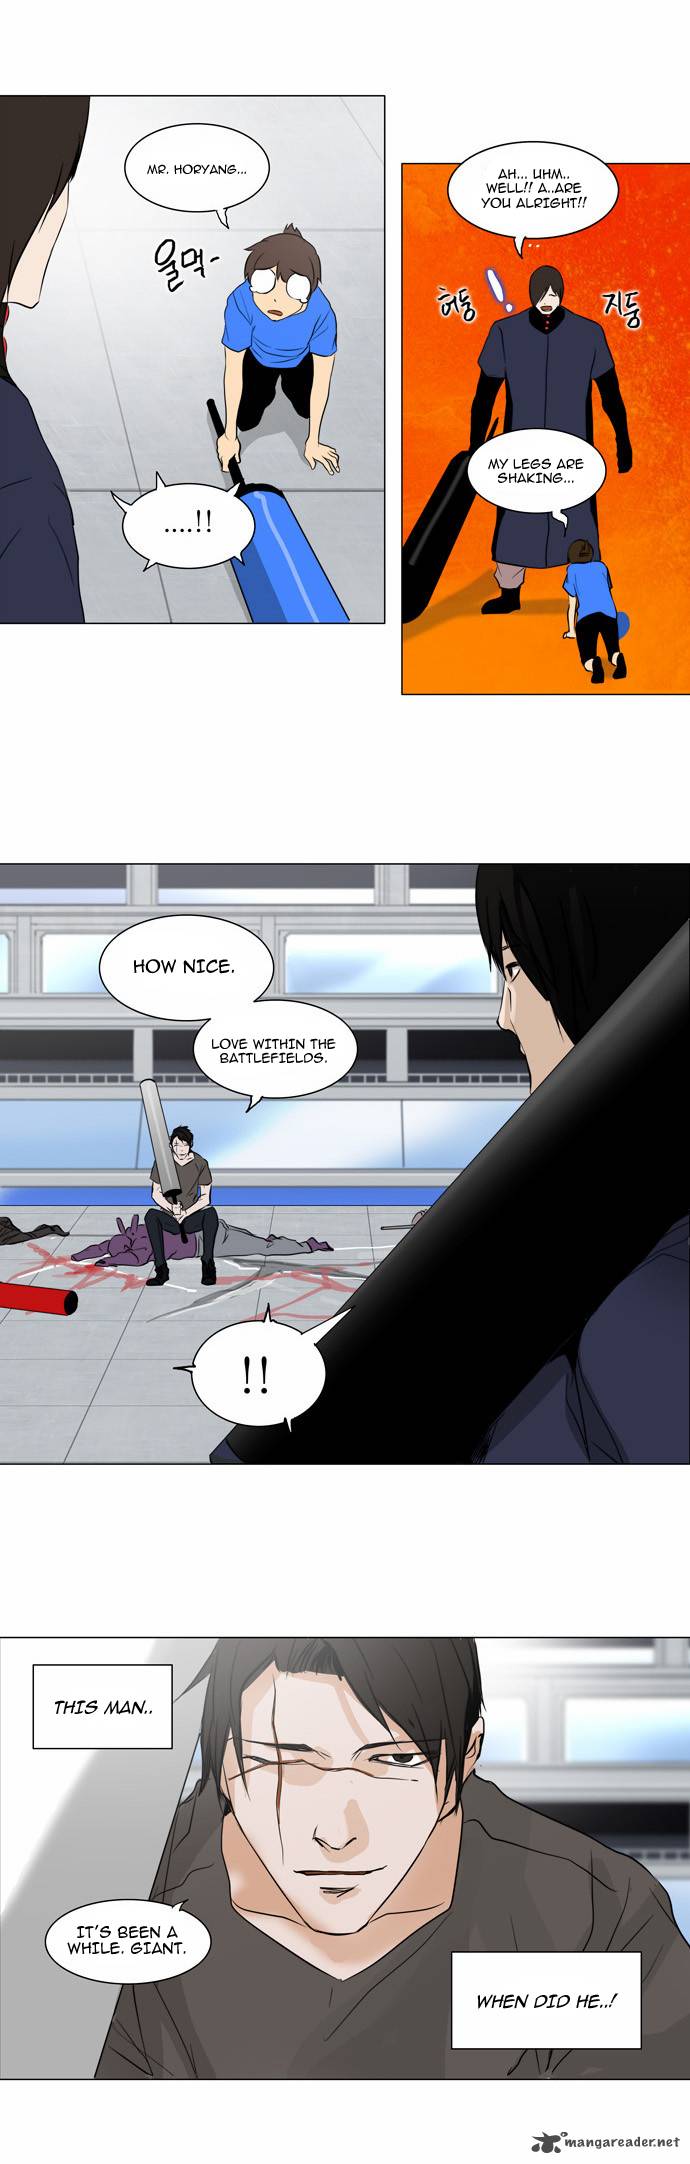 Tower Of God 151 16